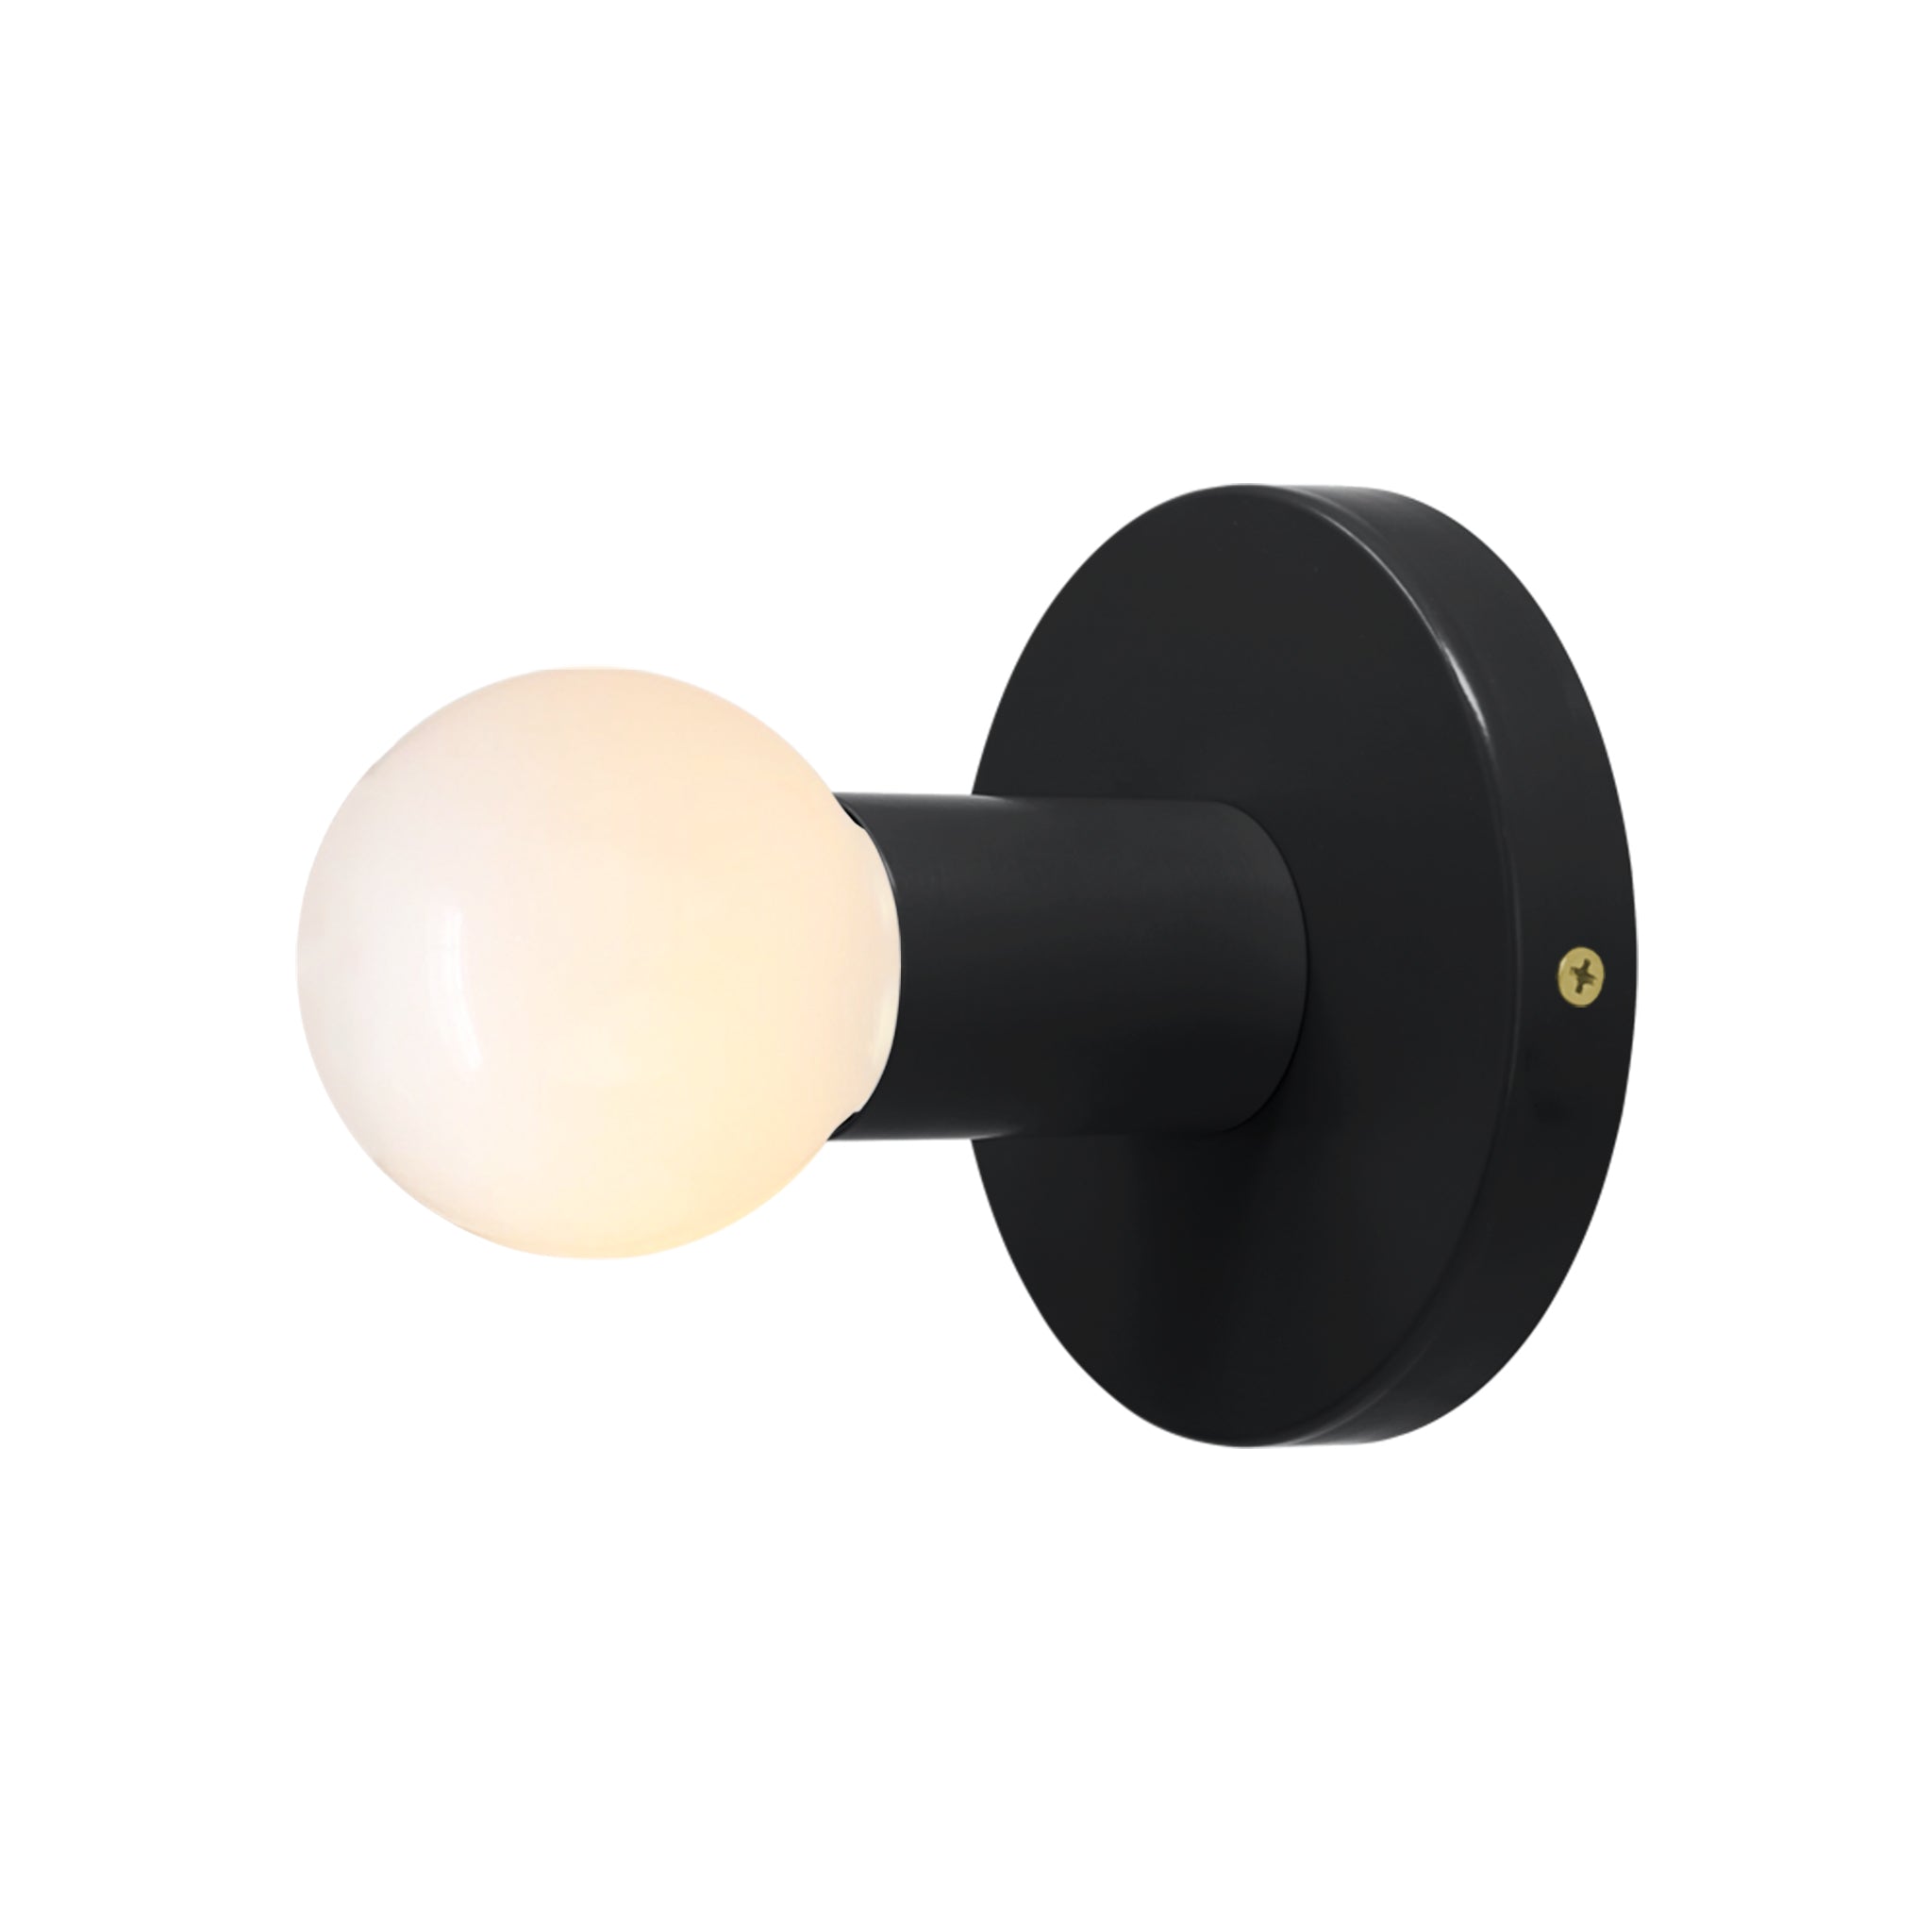 Brass and black color Twink sconce Dutton Brown lighting